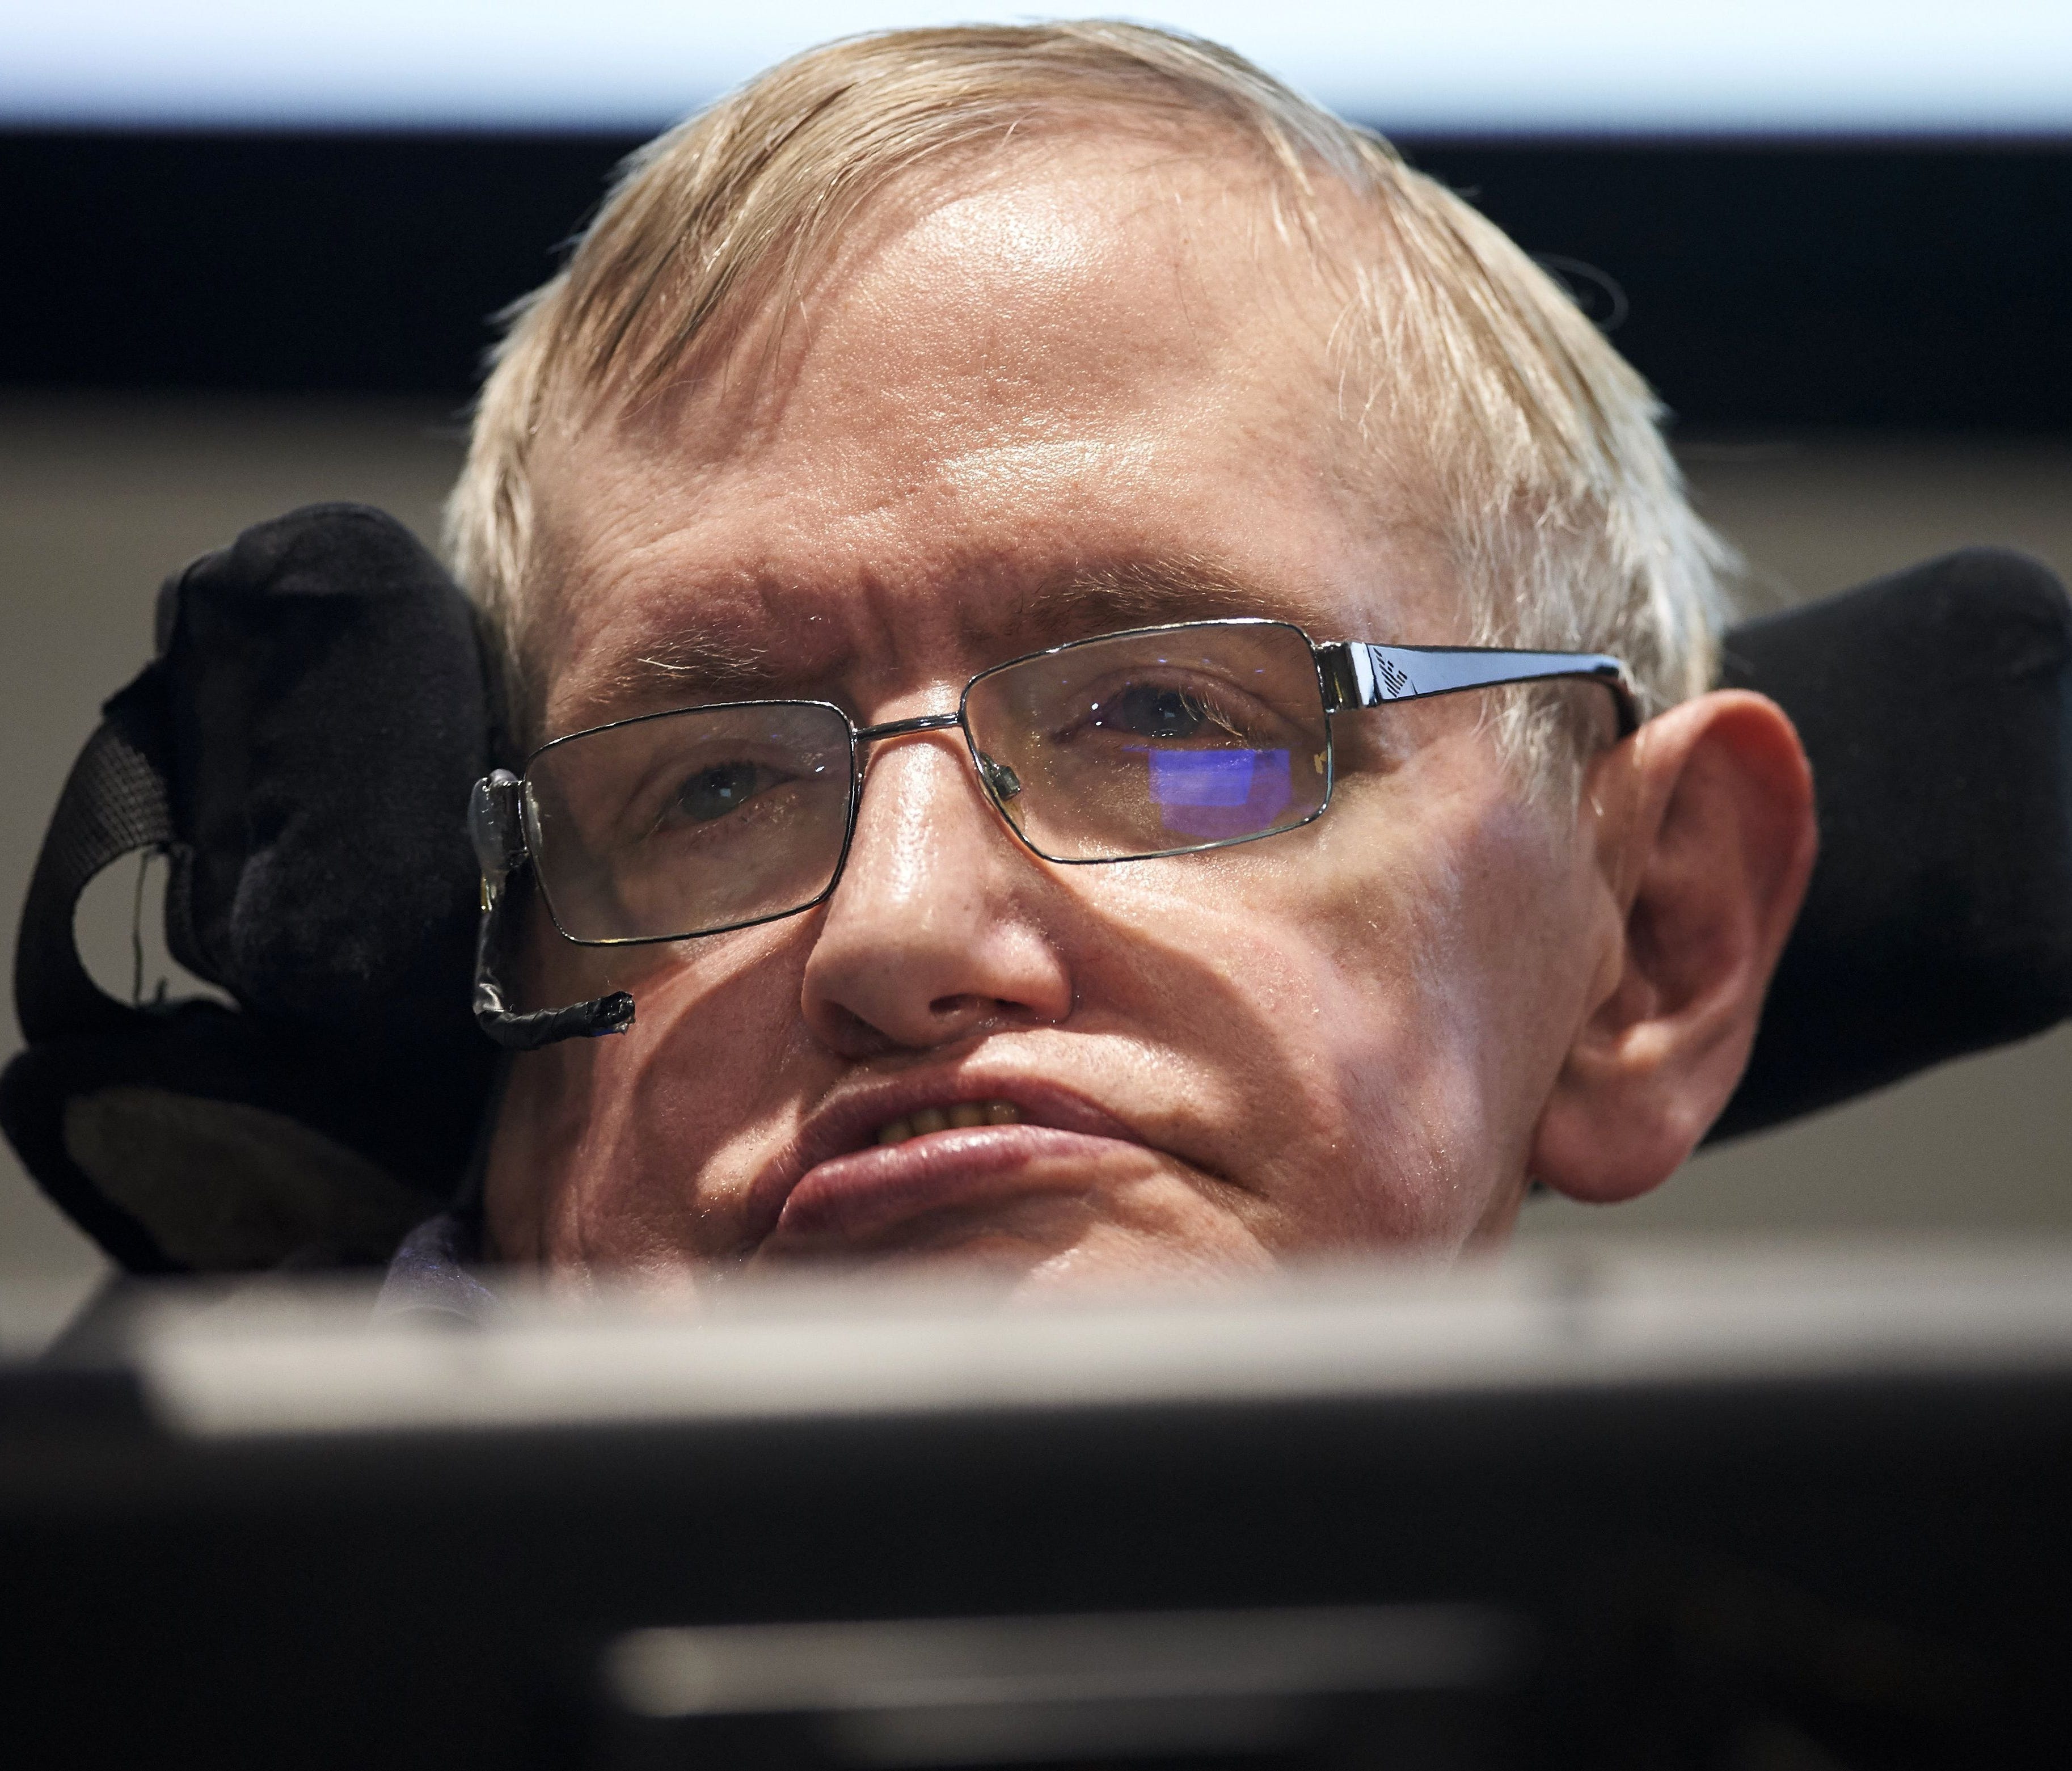 British scientist Stephen Hawking attends the launch of The Leverhulme Centre for the Future of Intelligence (CFI) at the University of Cambridge, in Cambridge, eastern England, on October 19, 2016.